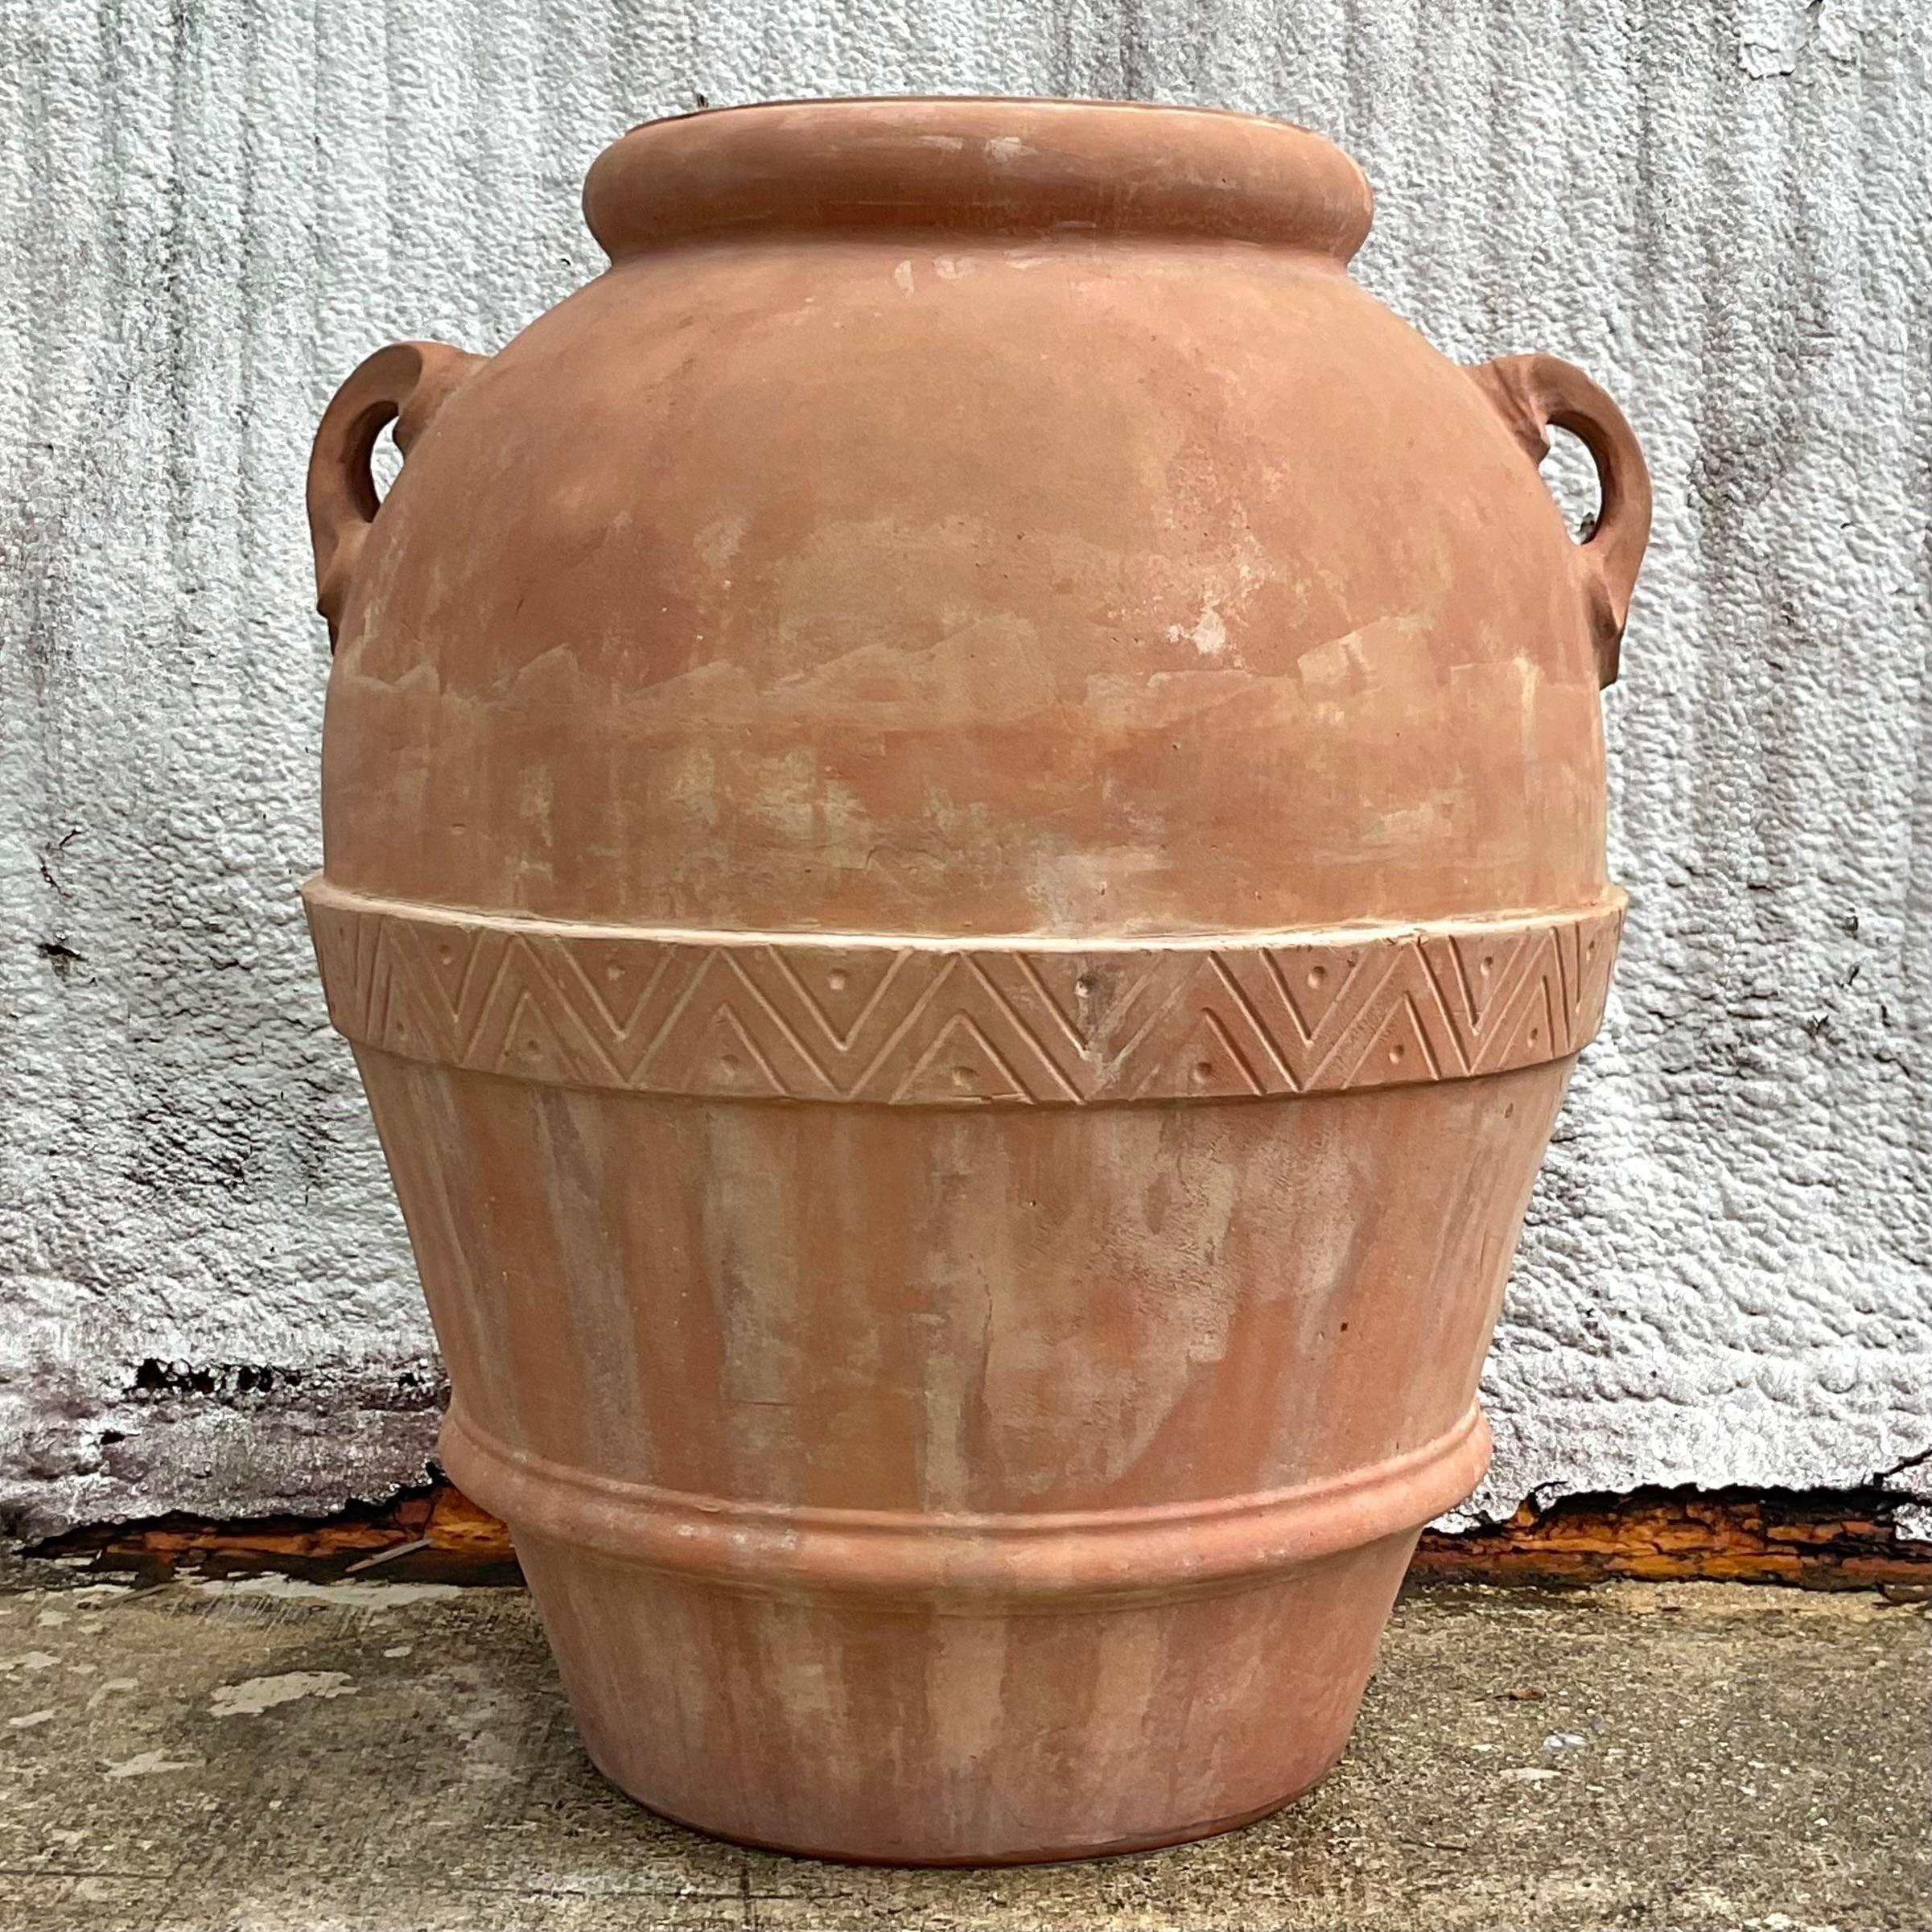 A stunning vintage Boho terracotta urn. Made by the iconic Seibert and Rice group. Monumental in size and drama. Acquired from a Palm Beach estate.